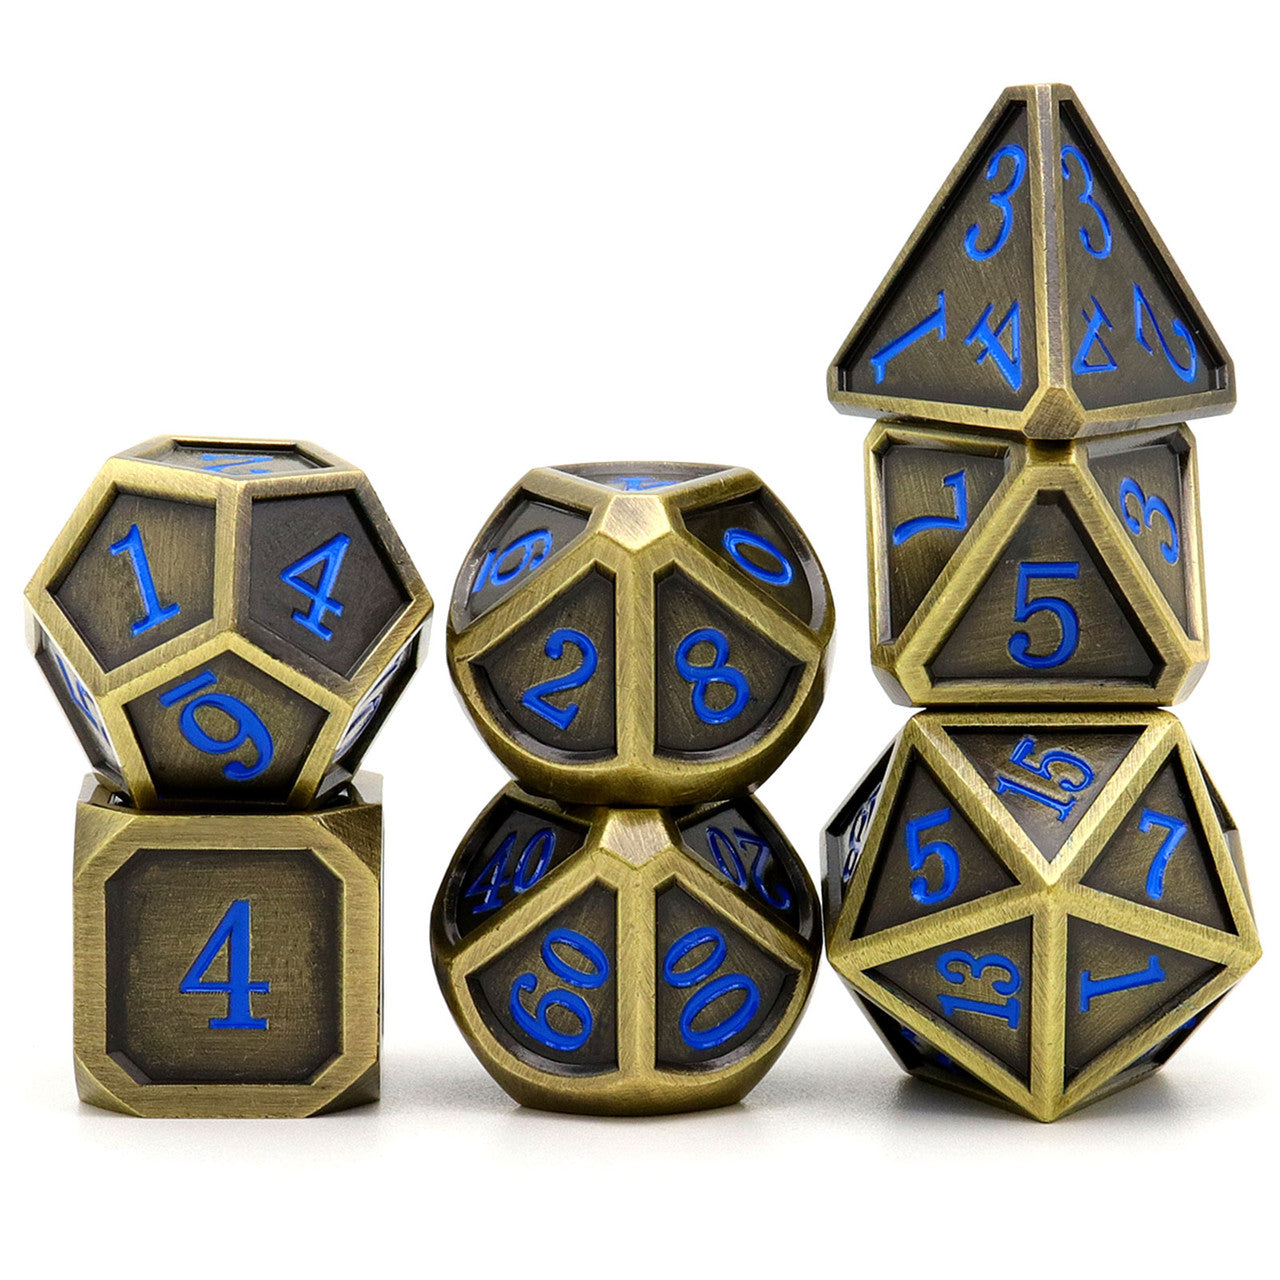 Haxtec Classic Collection Metal DND Dice-Fine Antique Bronze Blue Numbers